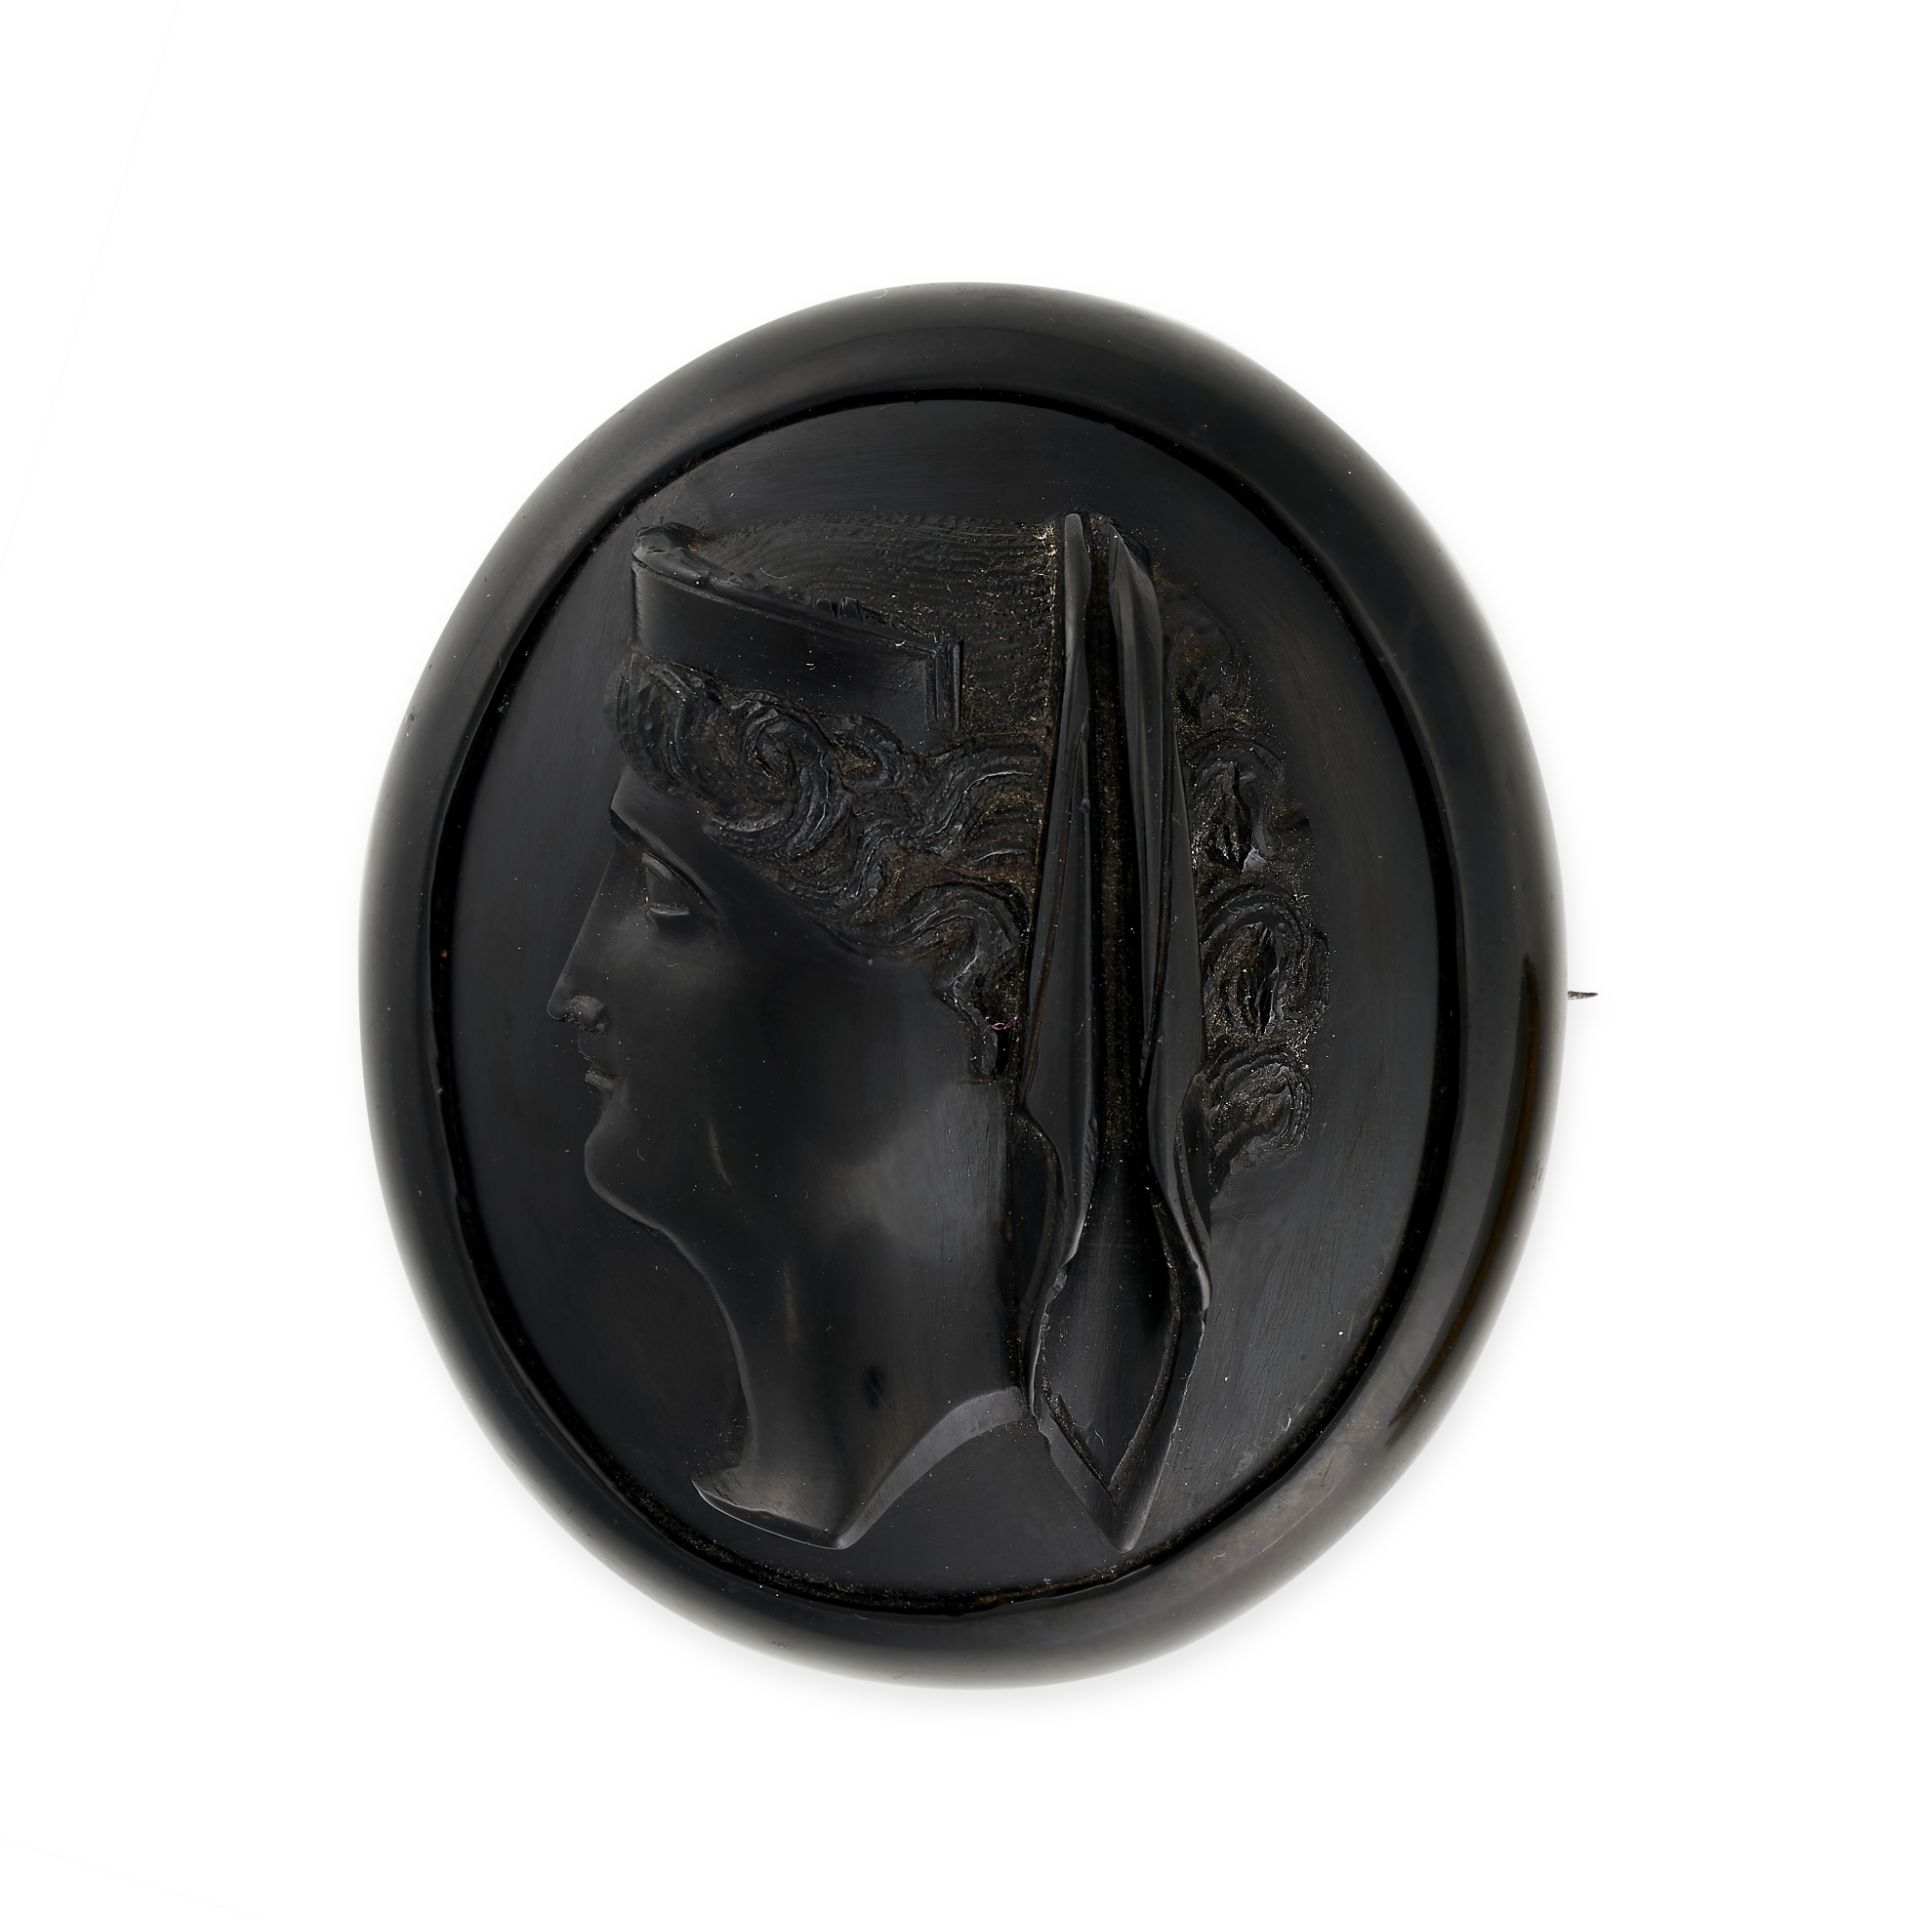 AN ANTIQUE JET CAMEO BROOCH the oval body formed from a single piece of jet, carved in detail to